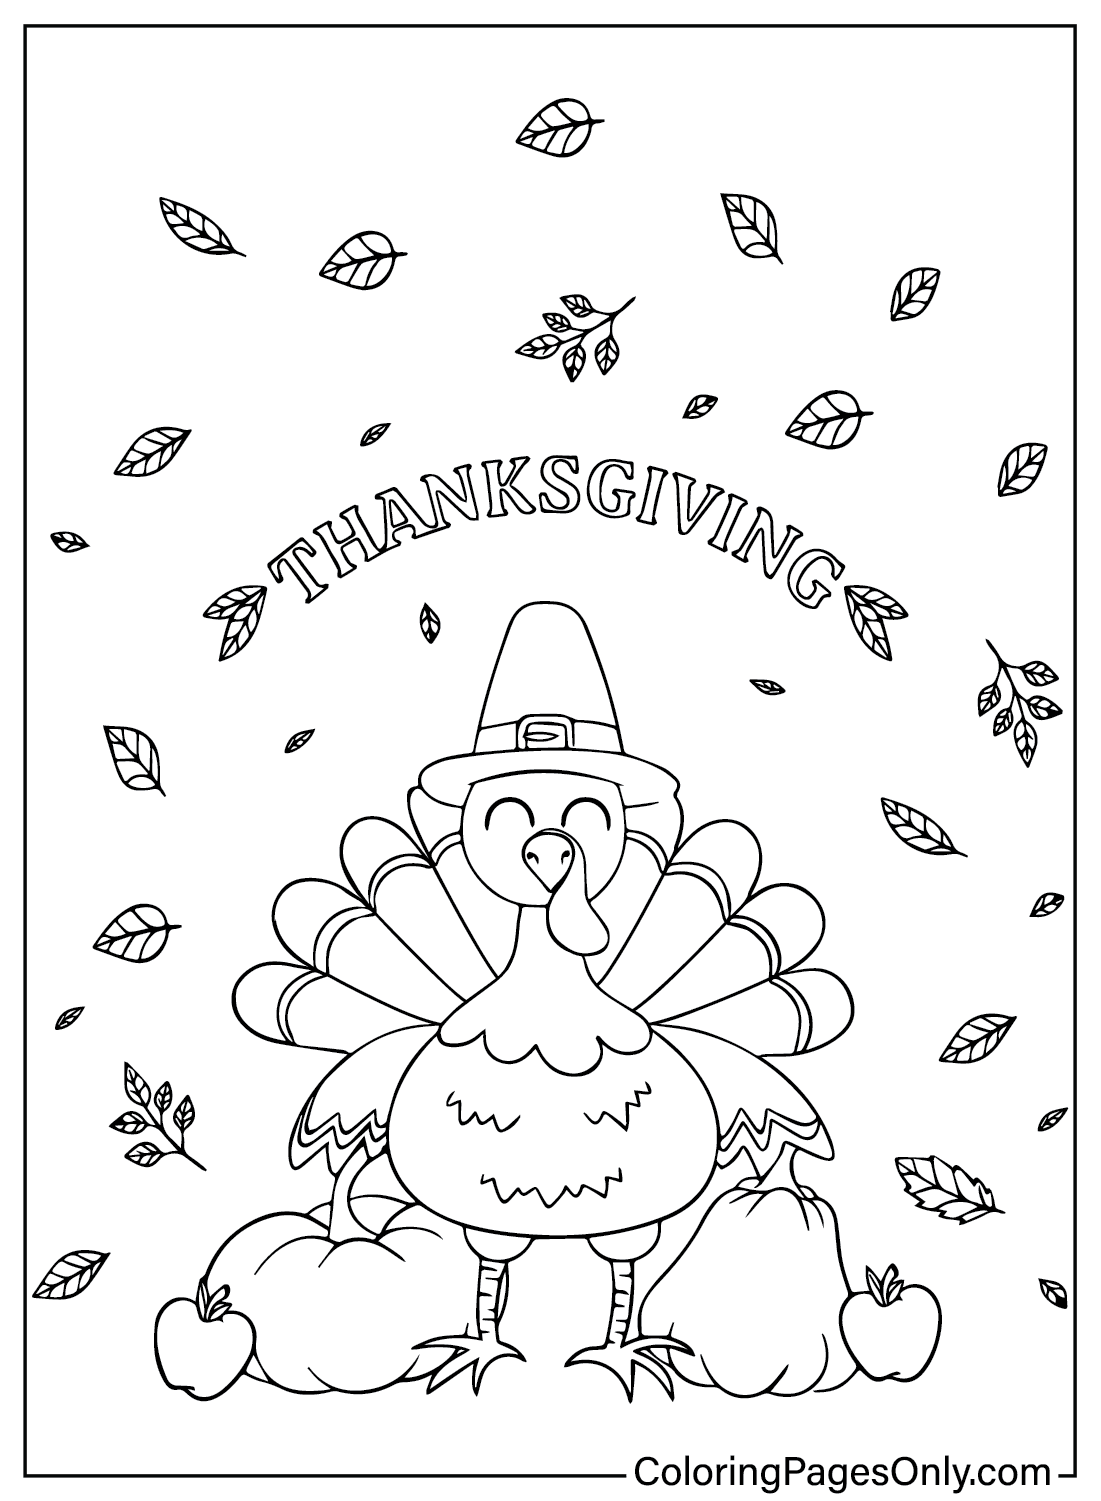 Thanksgiving Turkey Coloring Page